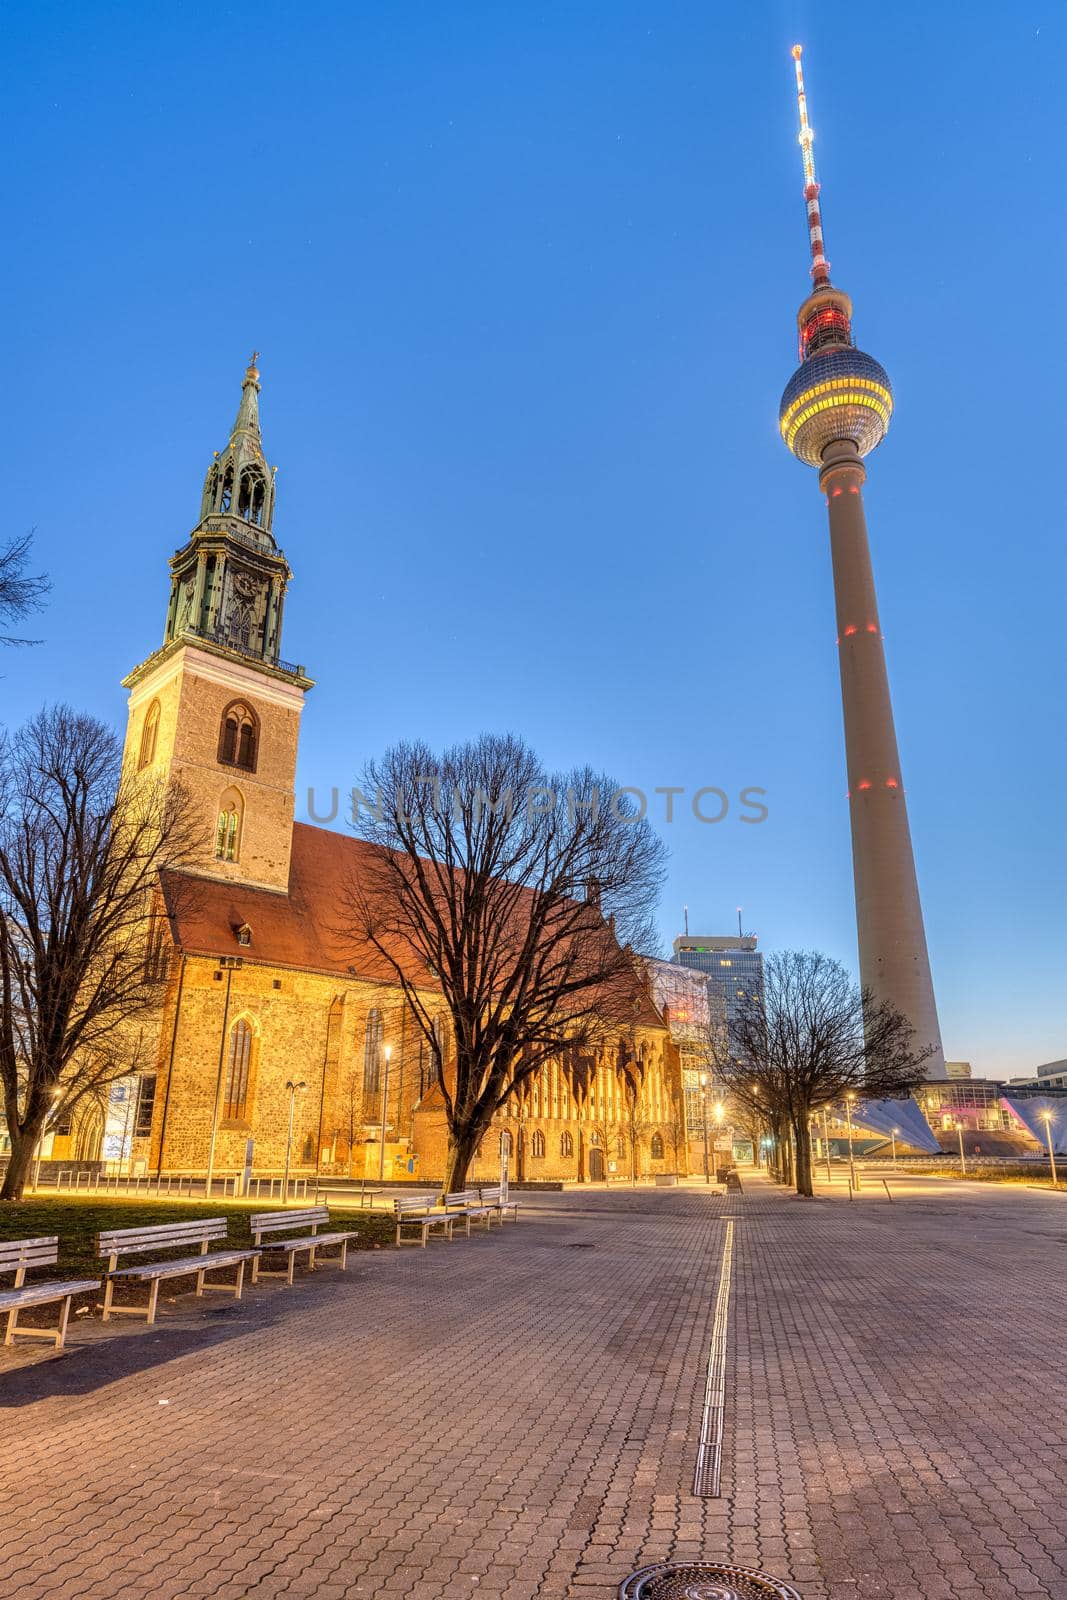 The famous TV Tower and the St. Mary's Church at dawn by elxeneize